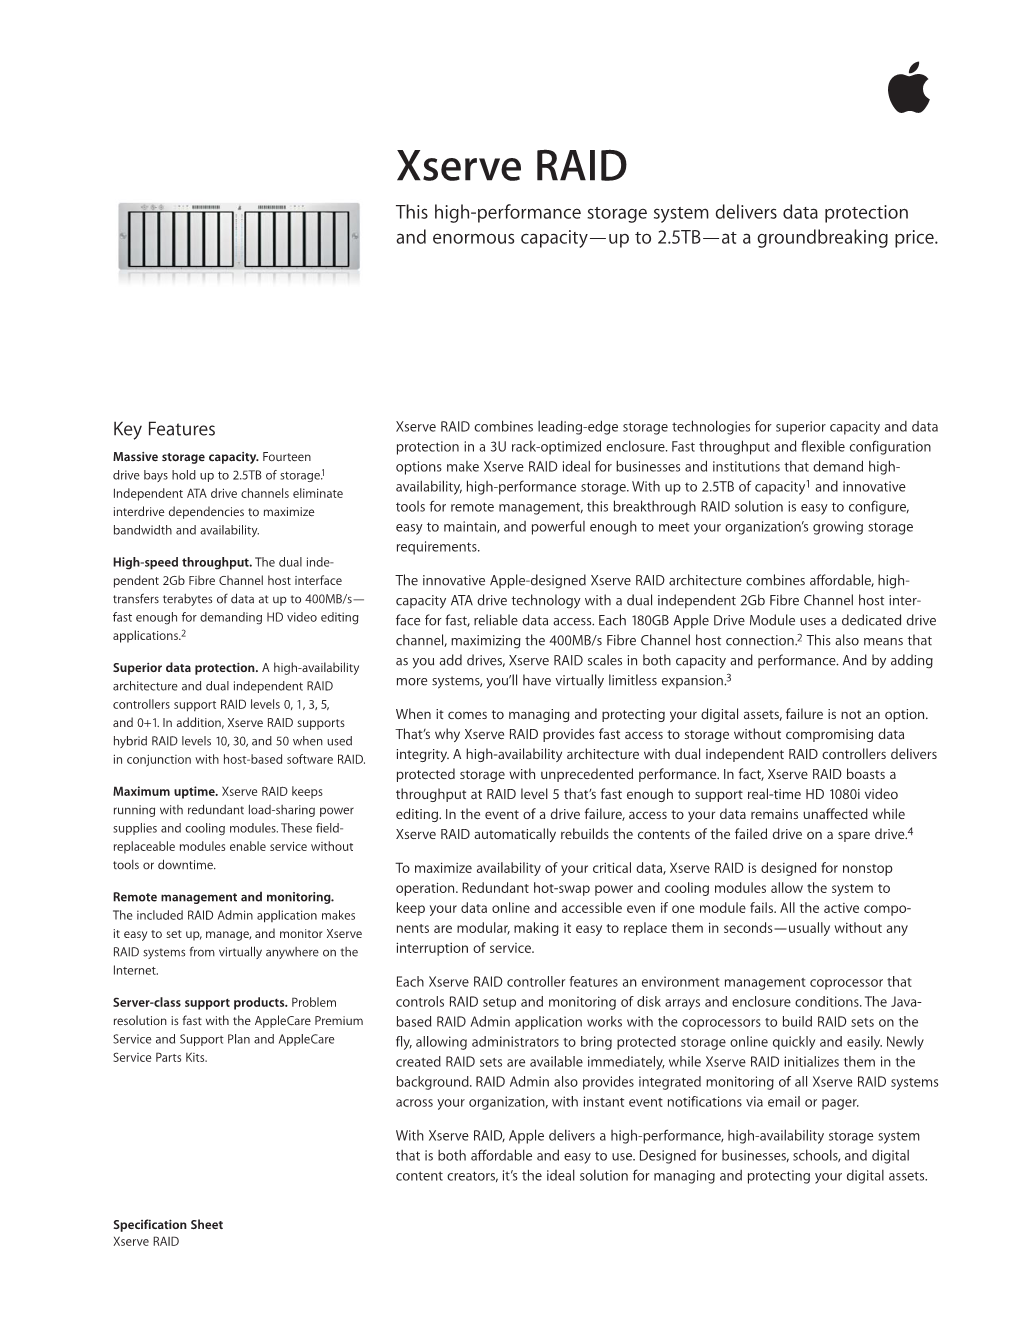 Xserve RAID This High-Performance Storage System Delivers Data Protection and Enormous Capacity—Up to 2.5TB—At a Groundbreaking Price